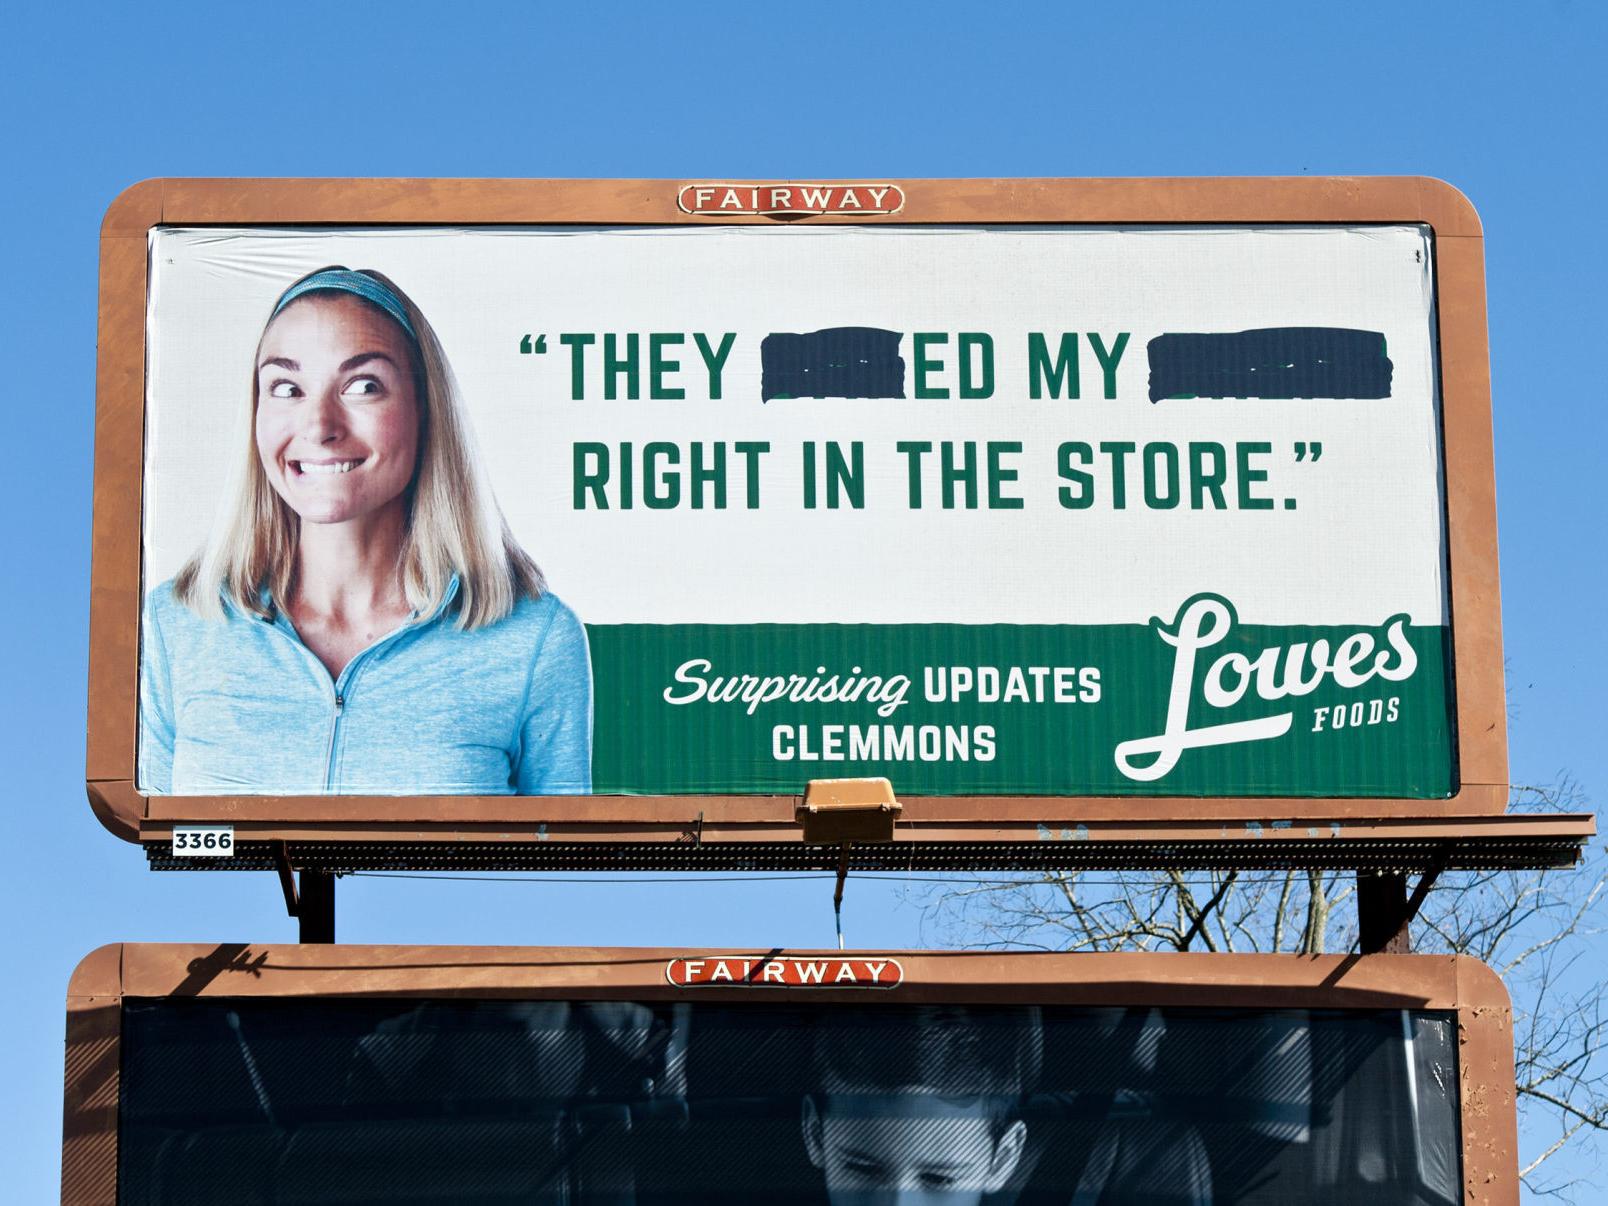 Humor Marketing Five Ads That Got Consumers Laughing The Drum